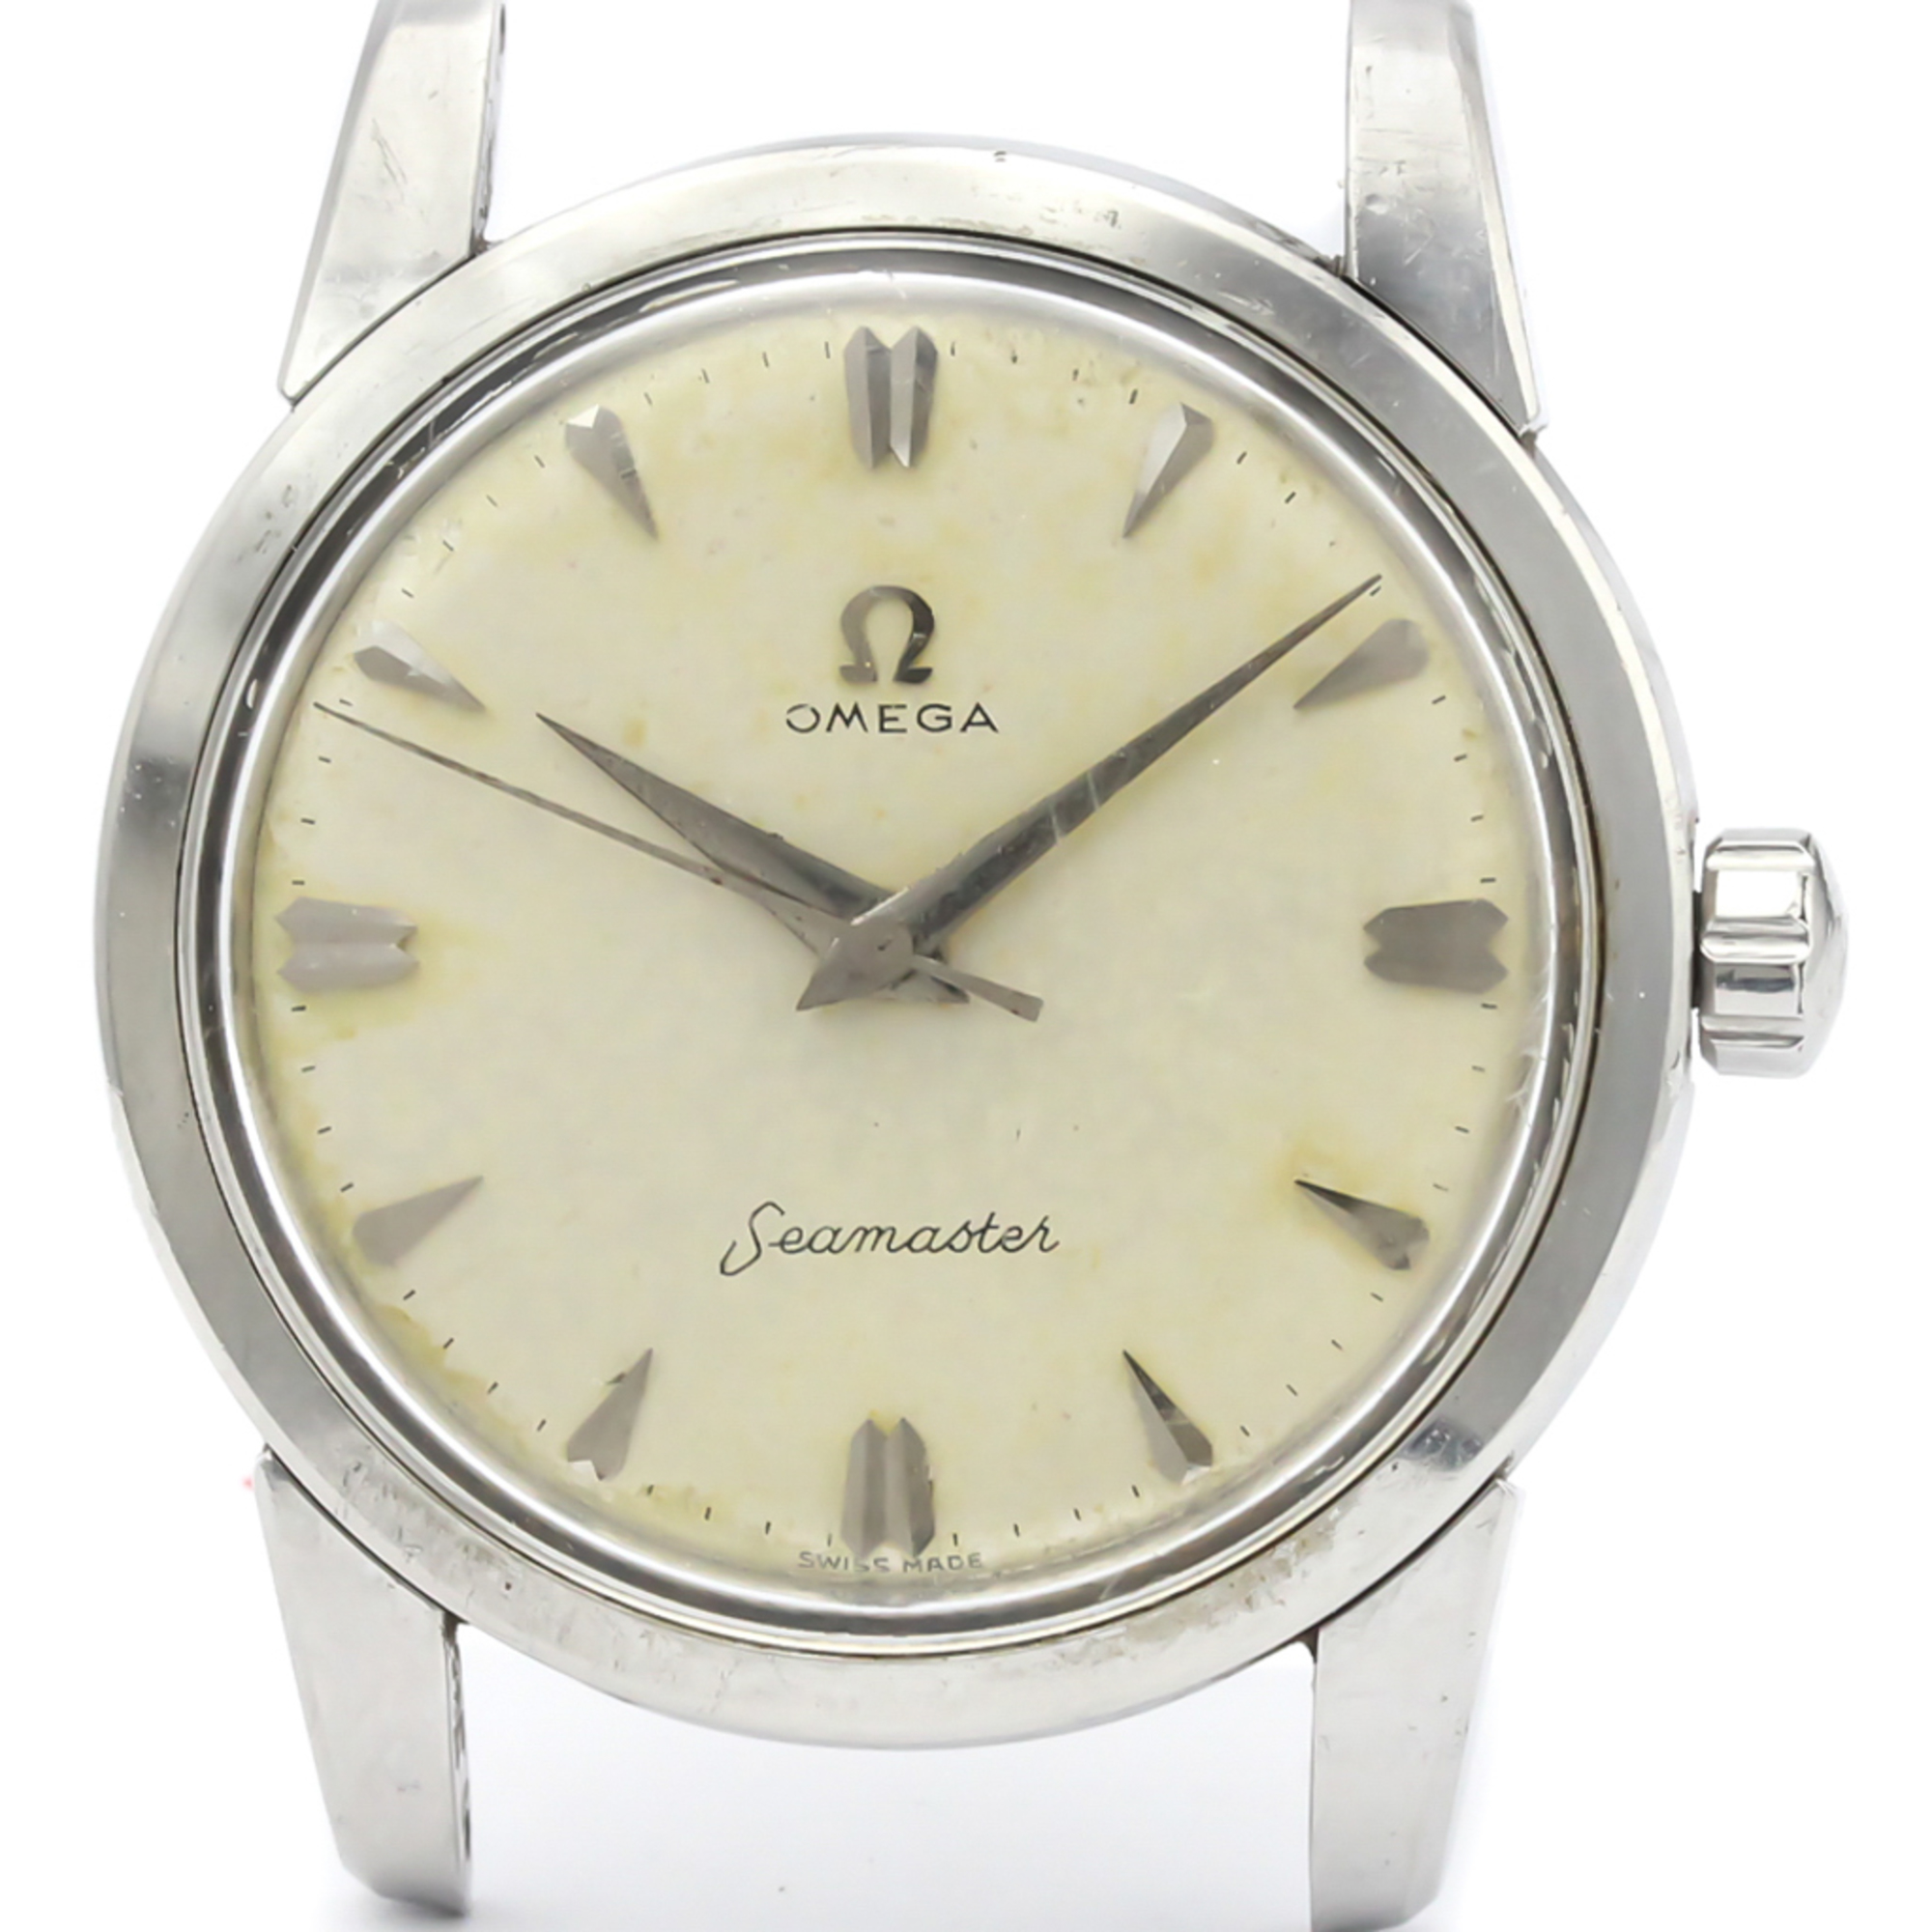 OMEGA Seamaster Cal.410 Steel Automatic Mens Watch 2759